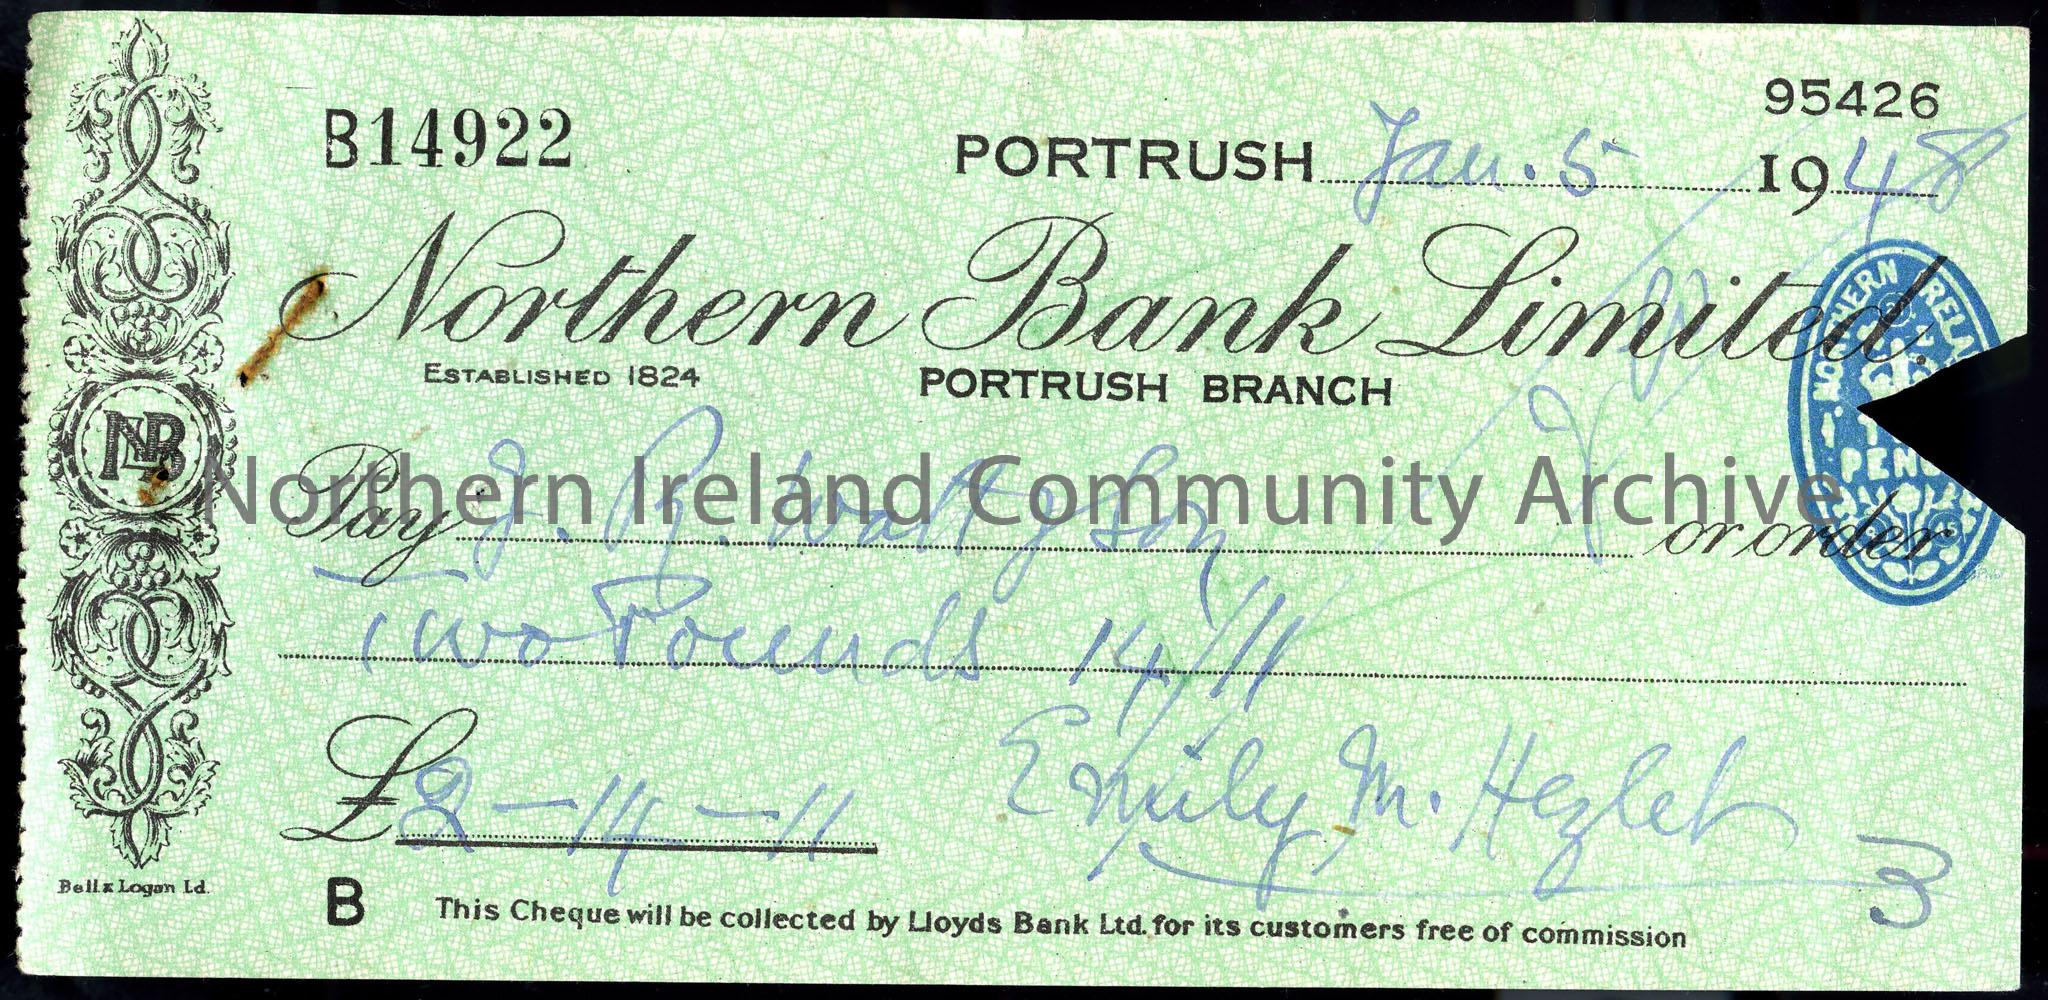 A cheque from ‘Northern Bank Limited’, ‘Portrush’ branch. Cheque no. ‘B14922’. Cheque payable to ‘J.R. Watt and son’ for ‘Two pounds 14/11’. Cheque si…